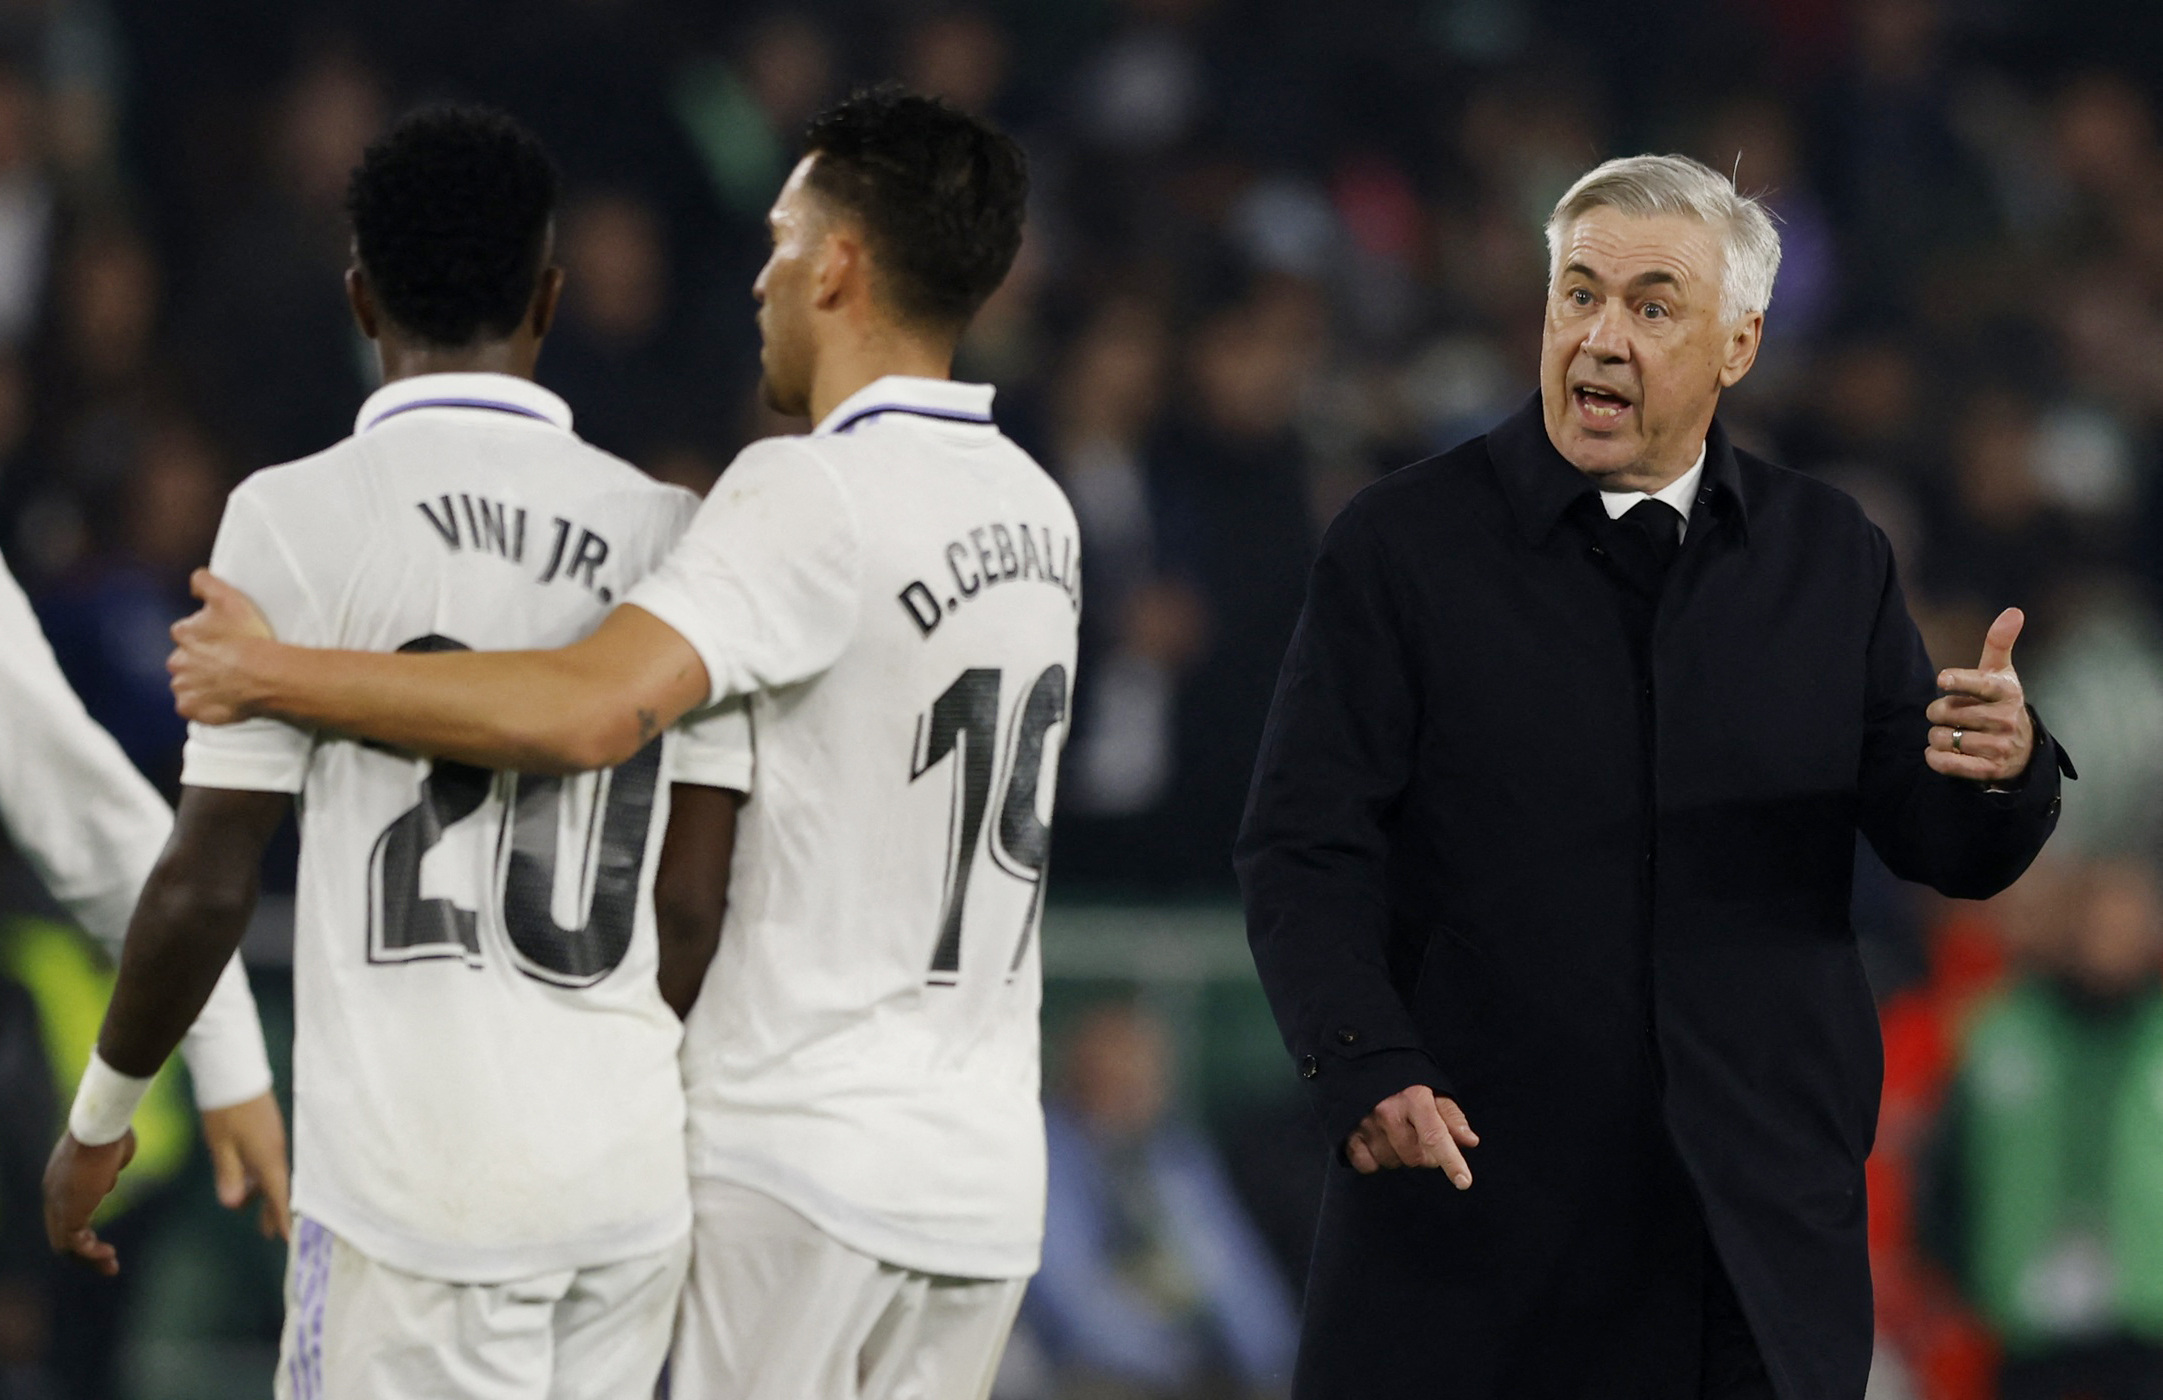 Real Madrid coach Carlo Ancelotti remonstrates with Vinicius Junior as Dani Ceballos looks on after the match REUTERS/Marcelo Del Pozo